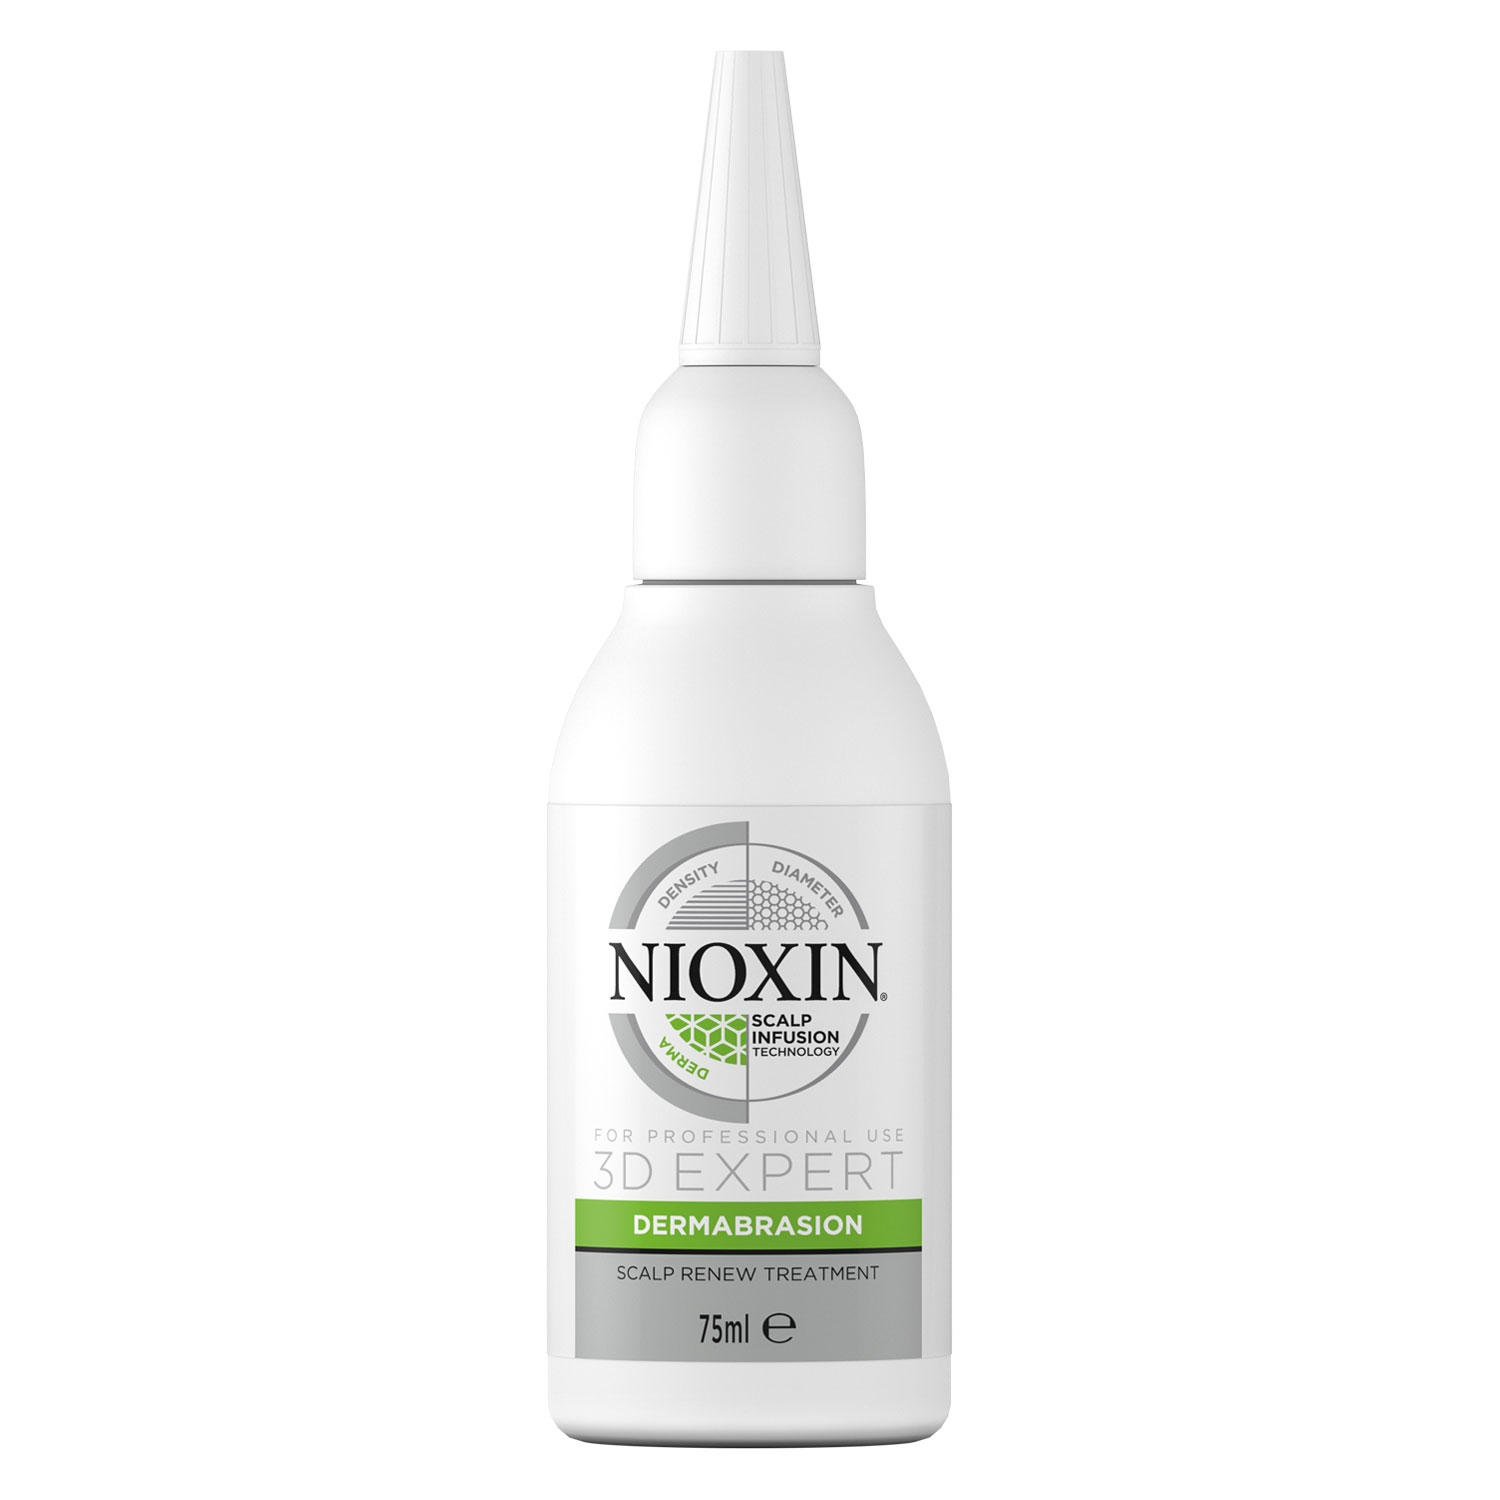 Product image from Nioxin - Dermabrasion